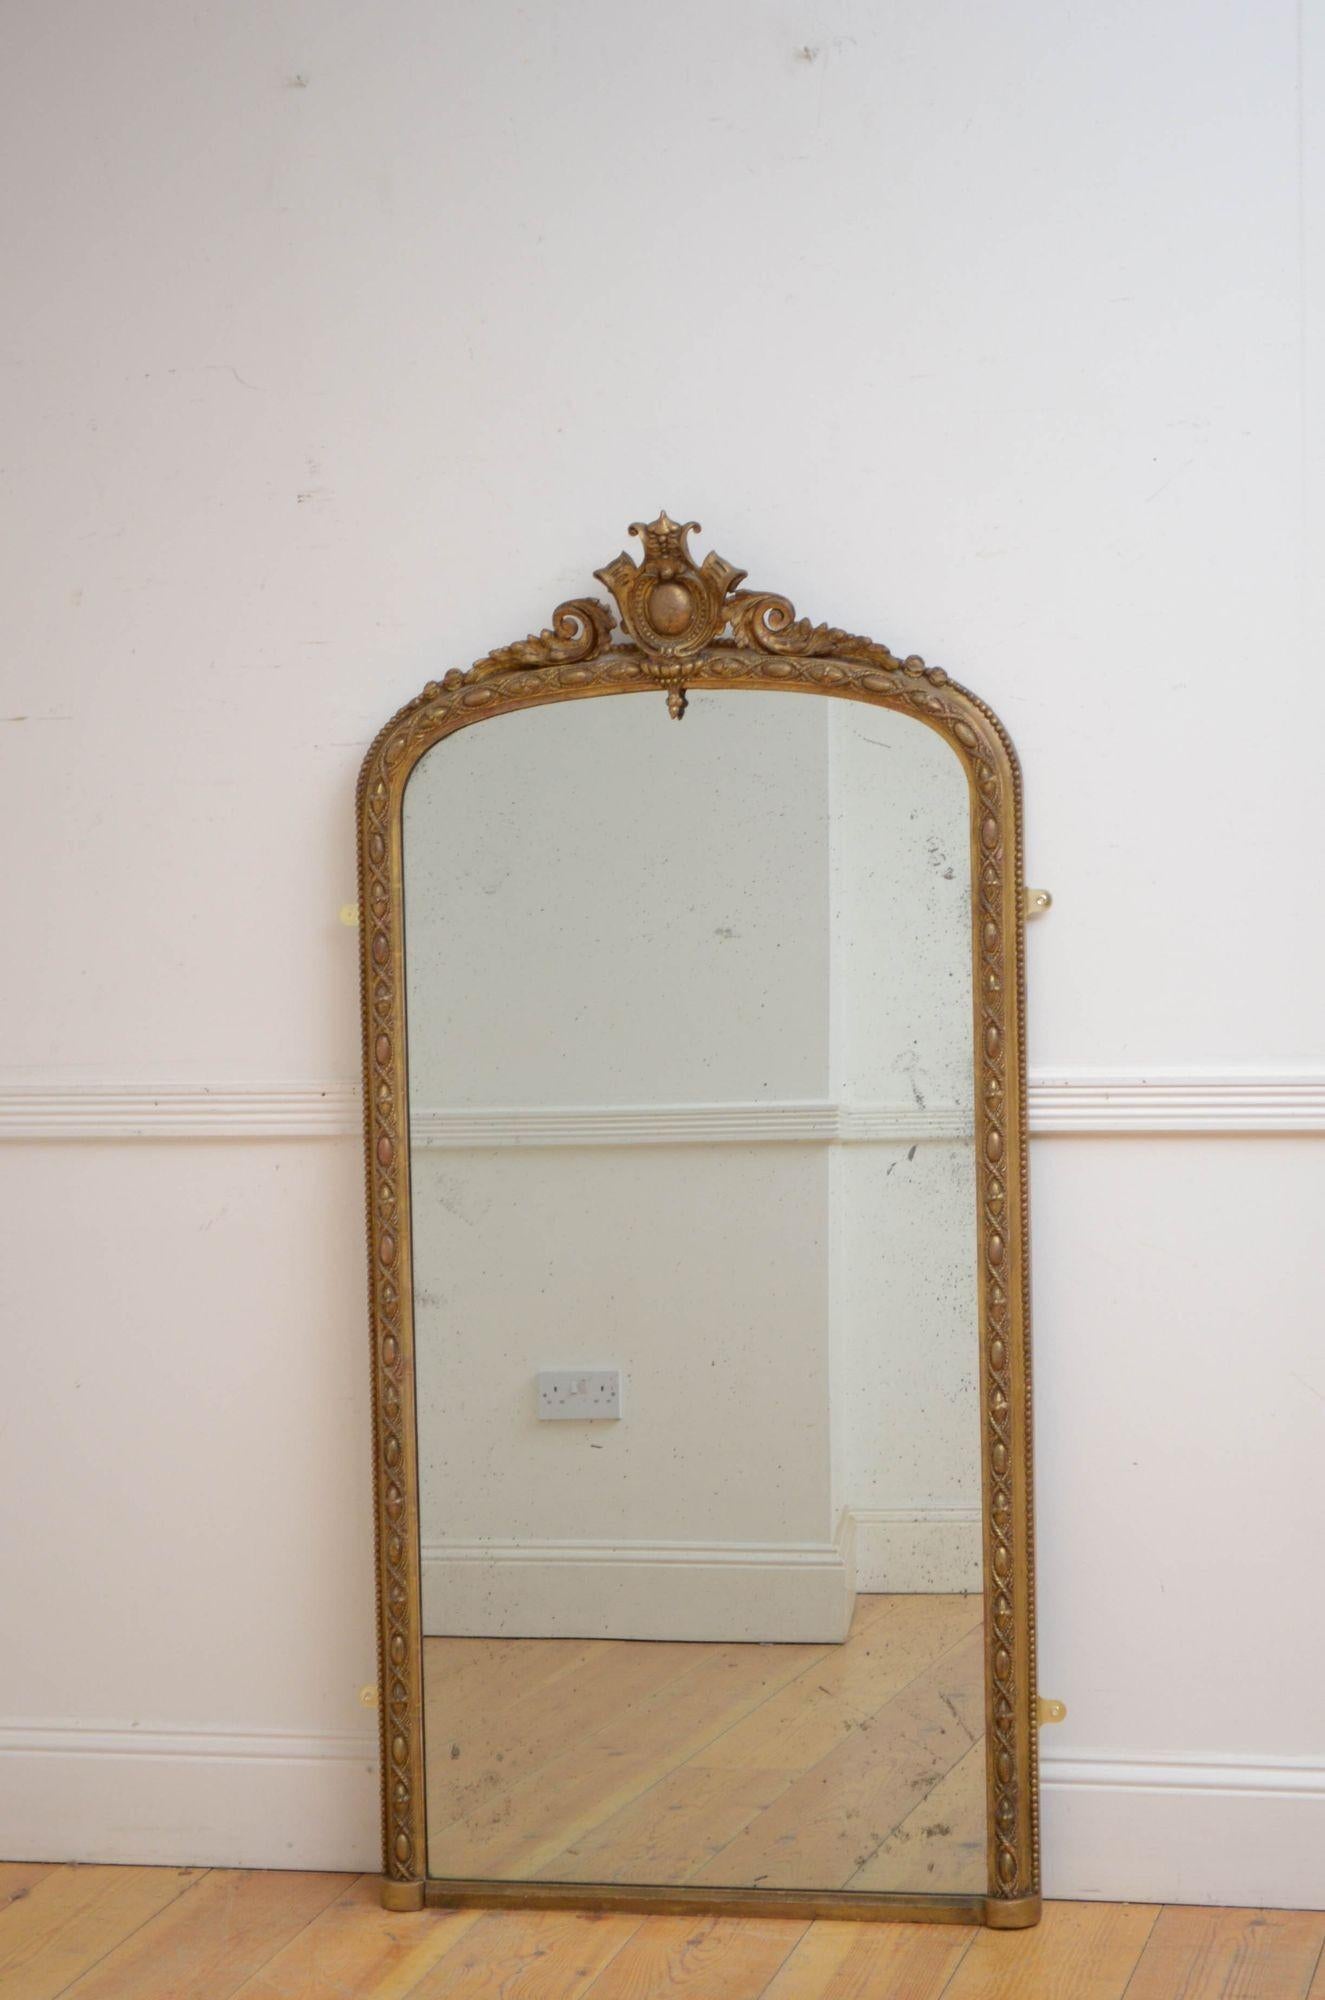 J027 Victorian gilded console table mirror or wall mirror, having original foxed glass in gilded, arched and finely frame with beaded outer edge and scroll crest to the centre. This antique mirror retains its original glass, original gilt and